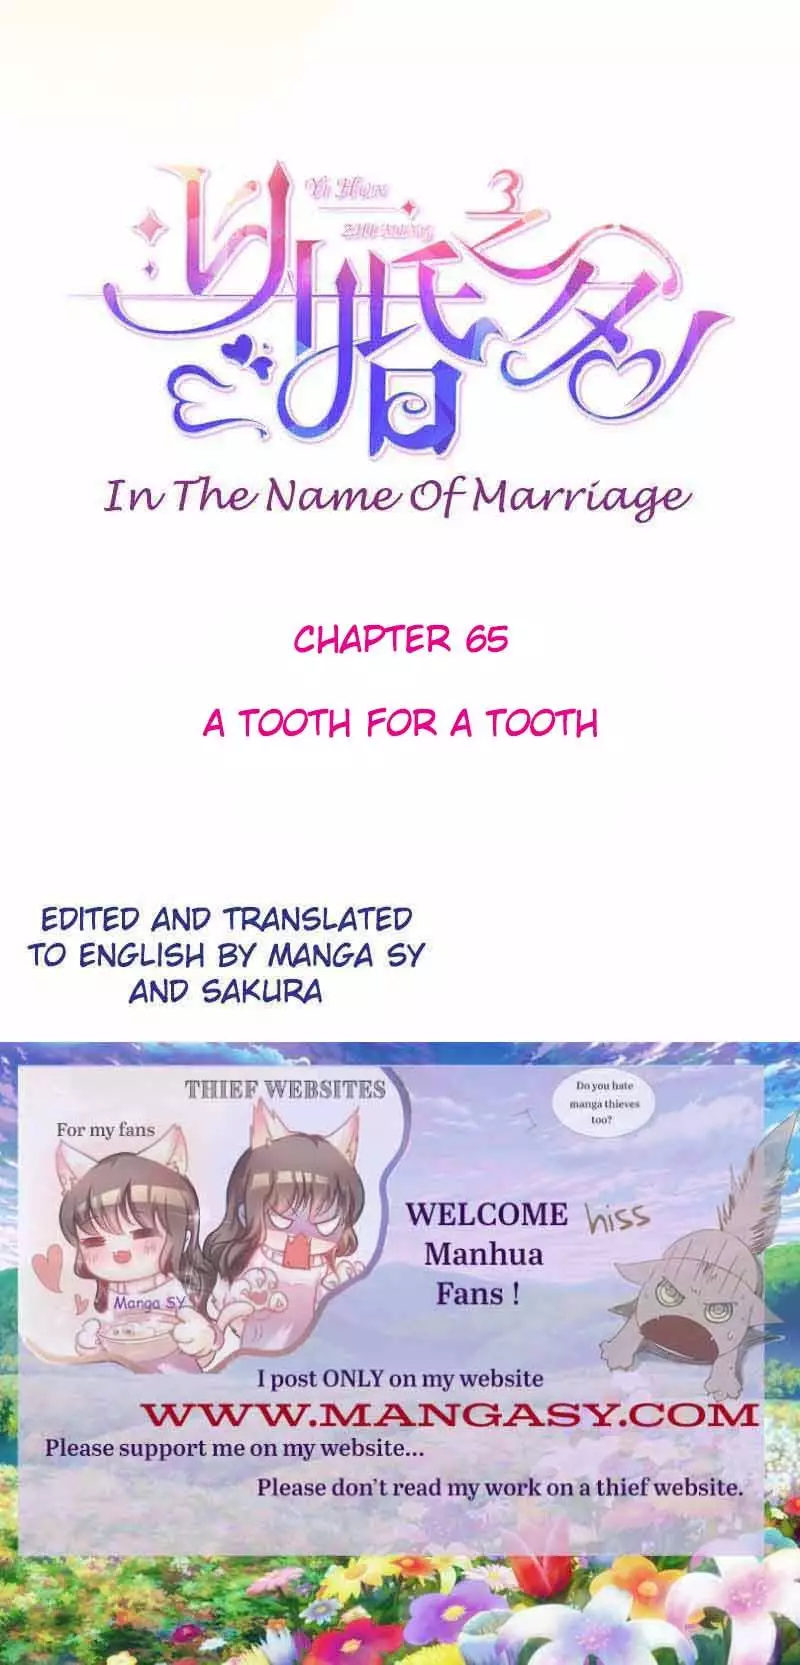 In The Name Of Marriage - 65 page 1-75c6e4bd